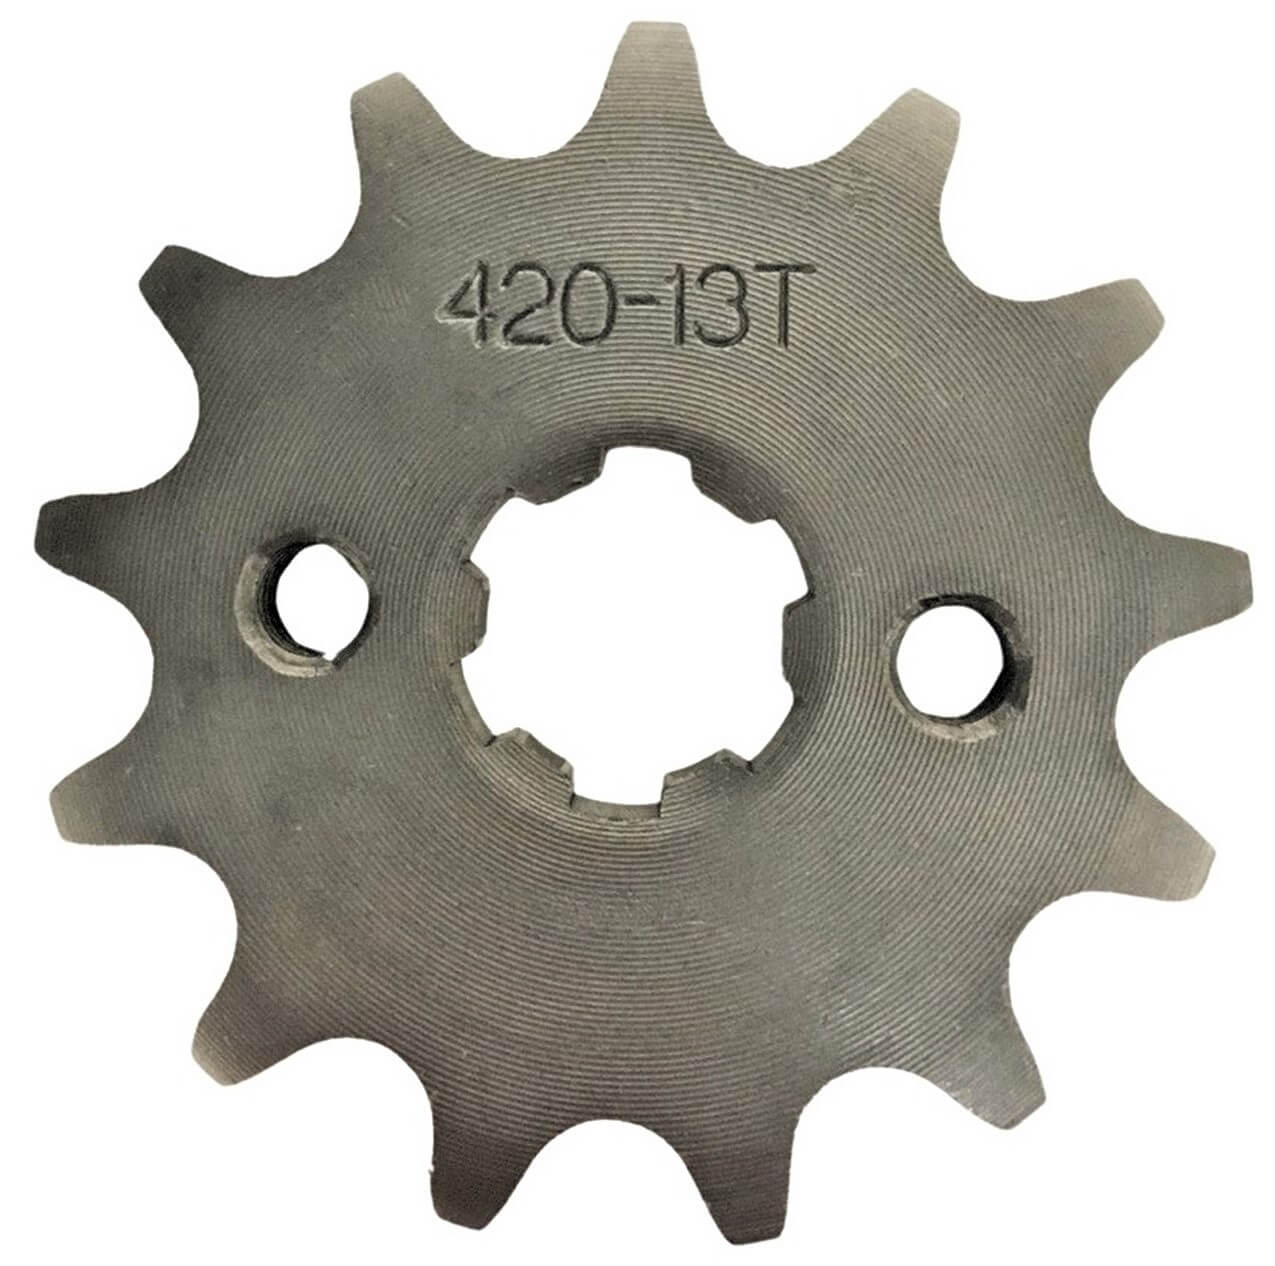 Front Sprocket #420 13th Bolts=2x30mm, Splines=6 Shaft=14/17mm (shortest/longest point) Bolts=M5 Fits many 70-125cc ATVs - Click Image to Close